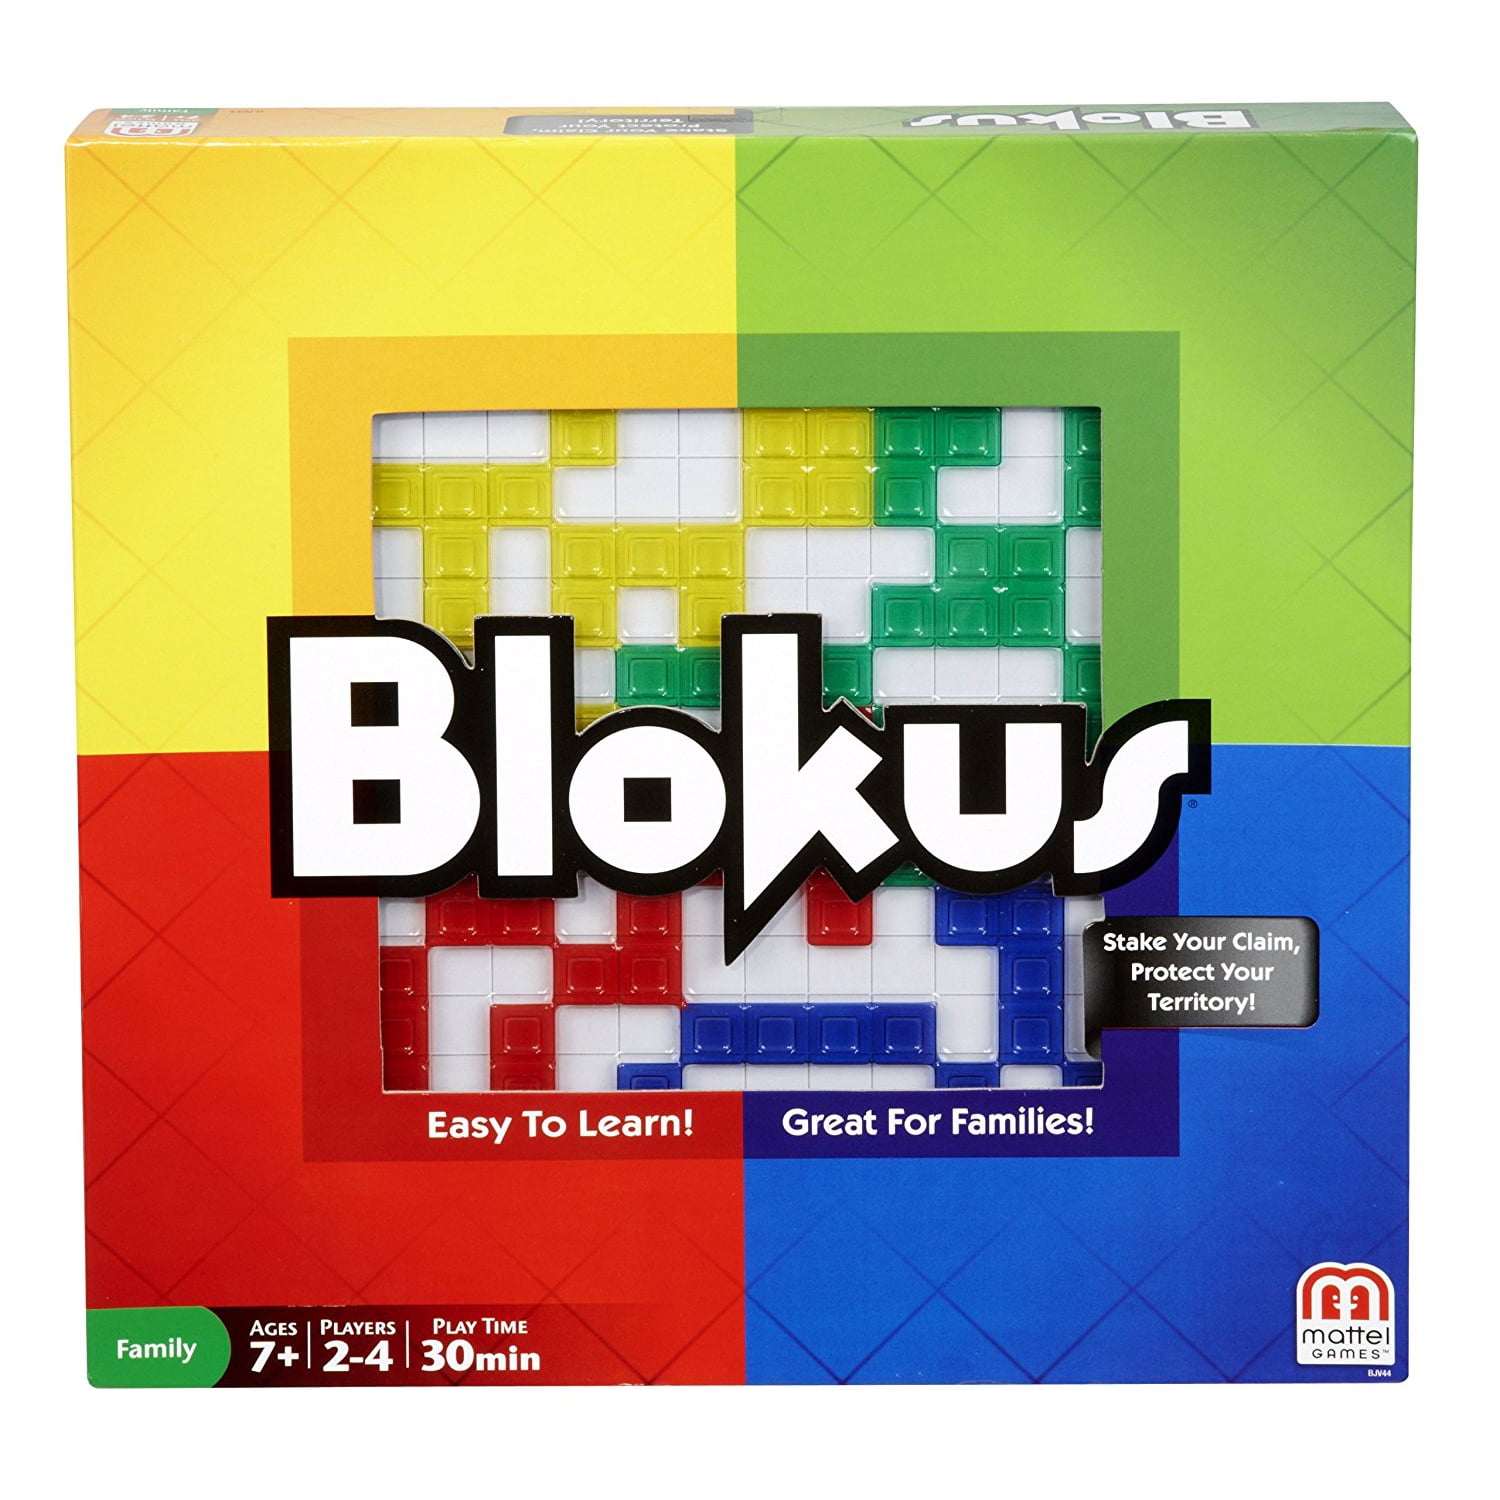 Blokus the board game, 4 players local - Games showcase - GDevelop Forum